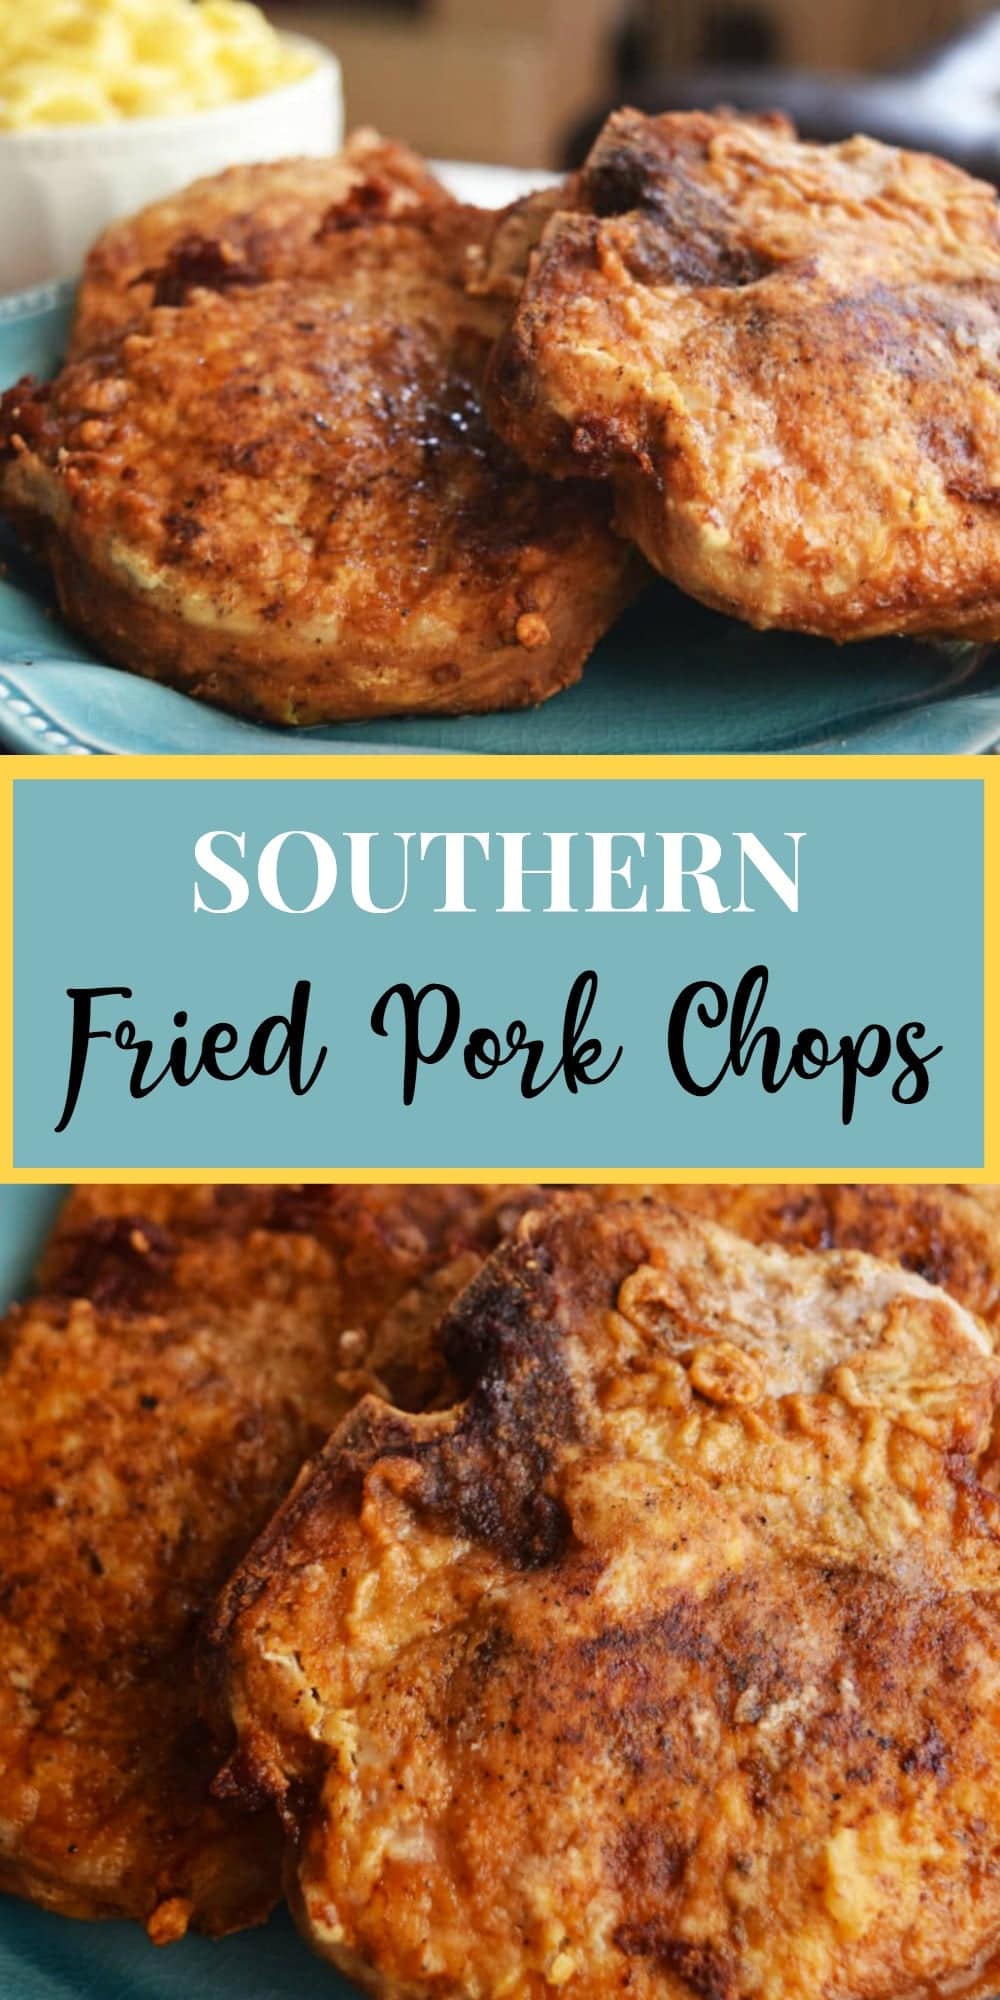 Southern Fried Pork Chops - Soulfully Made